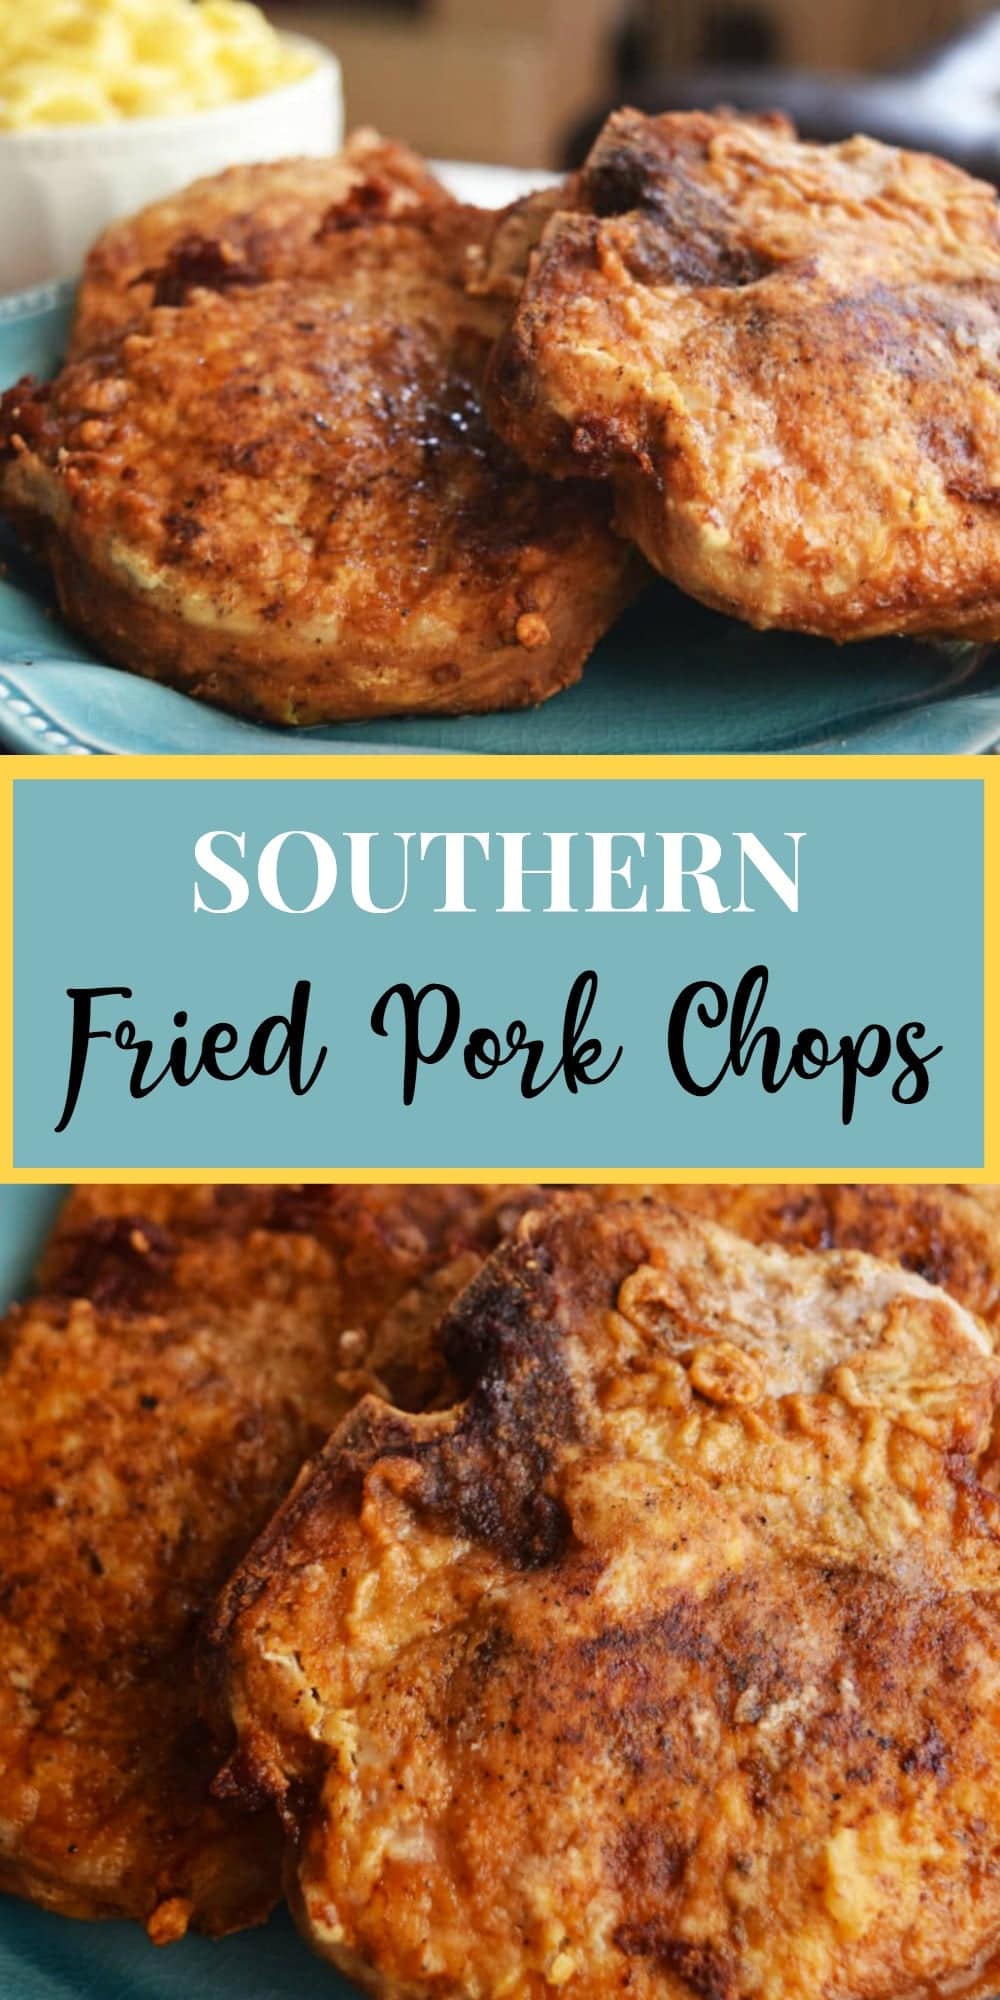 Southern Fried Pork Chops - Soulfully Made